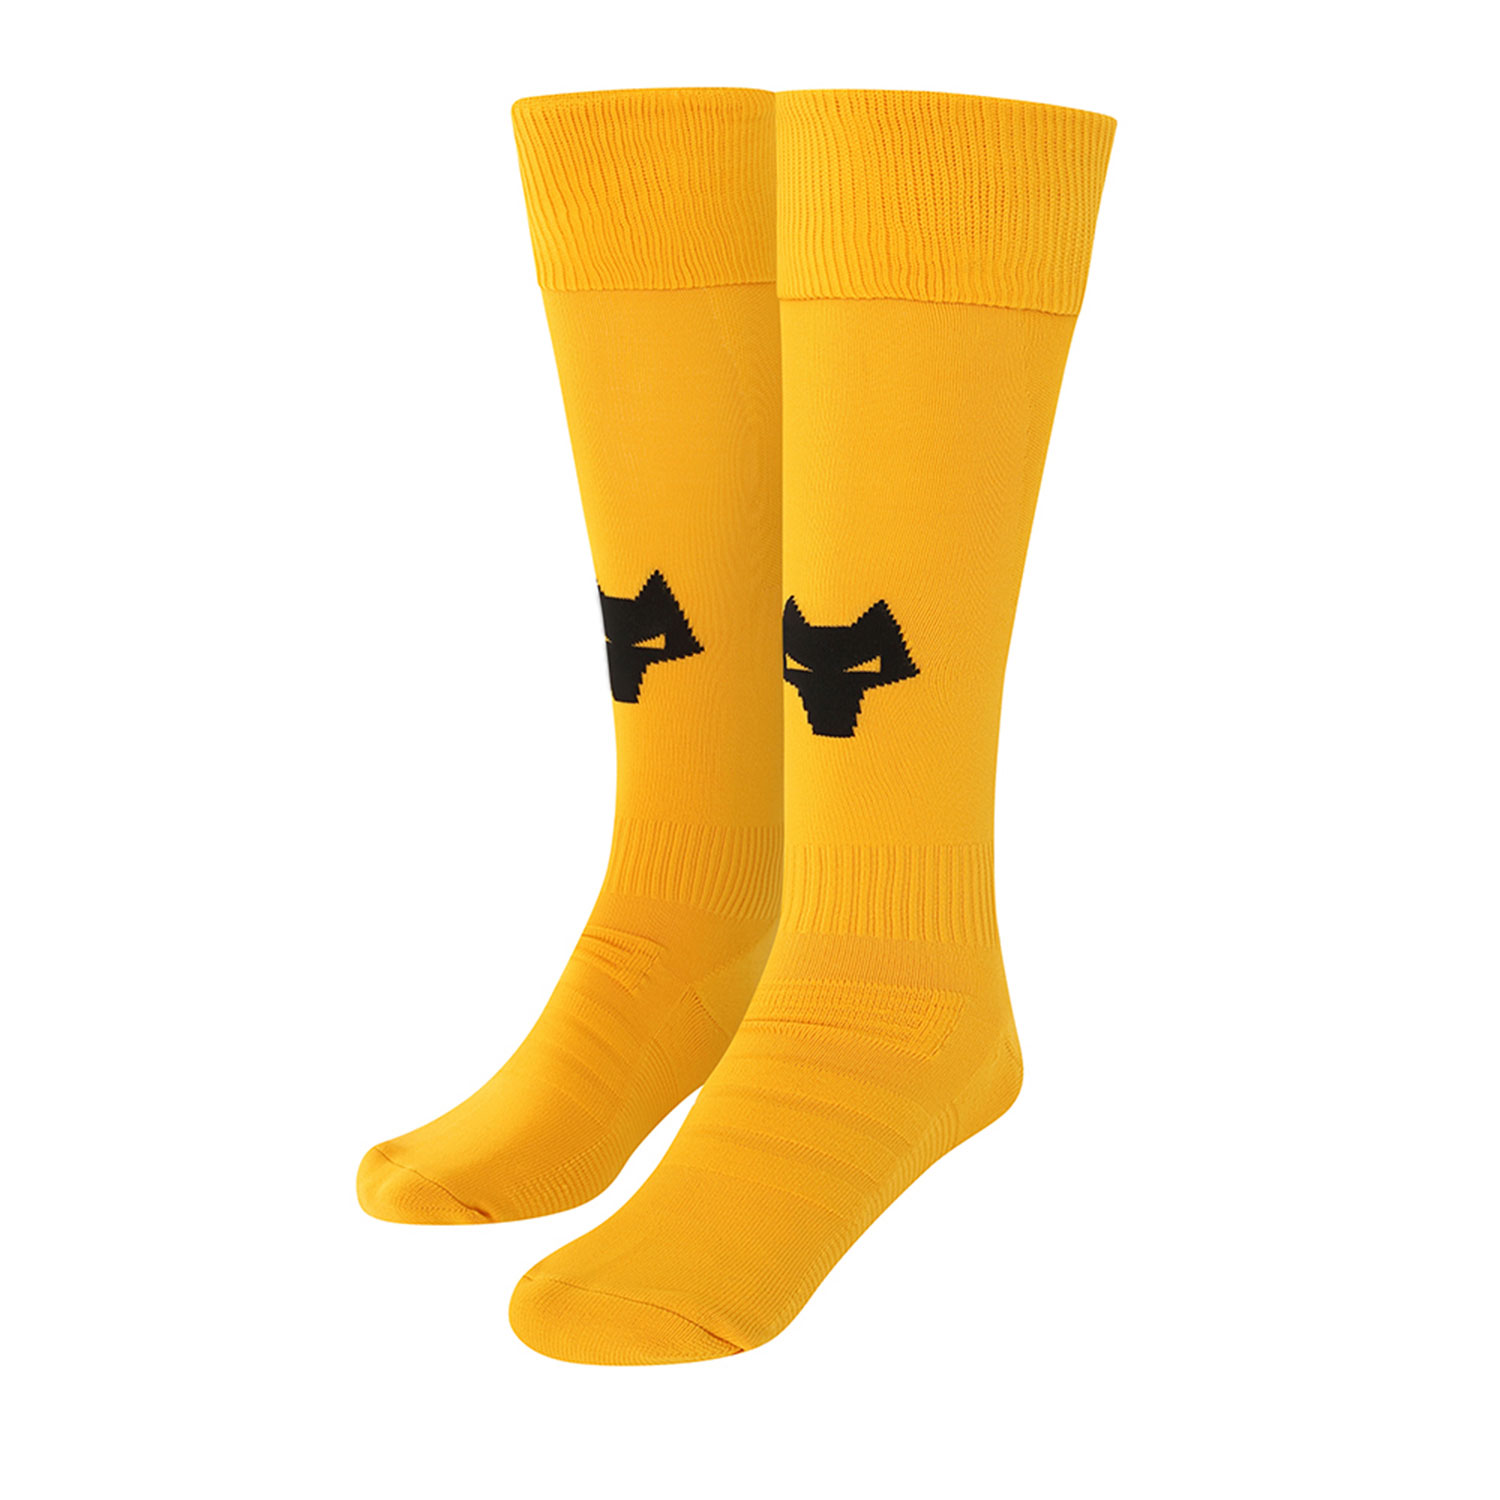 2022-23 Wolves Home Socks - Adult
Featuring a Wolves head incorporated into front and centre of the sock, to show prominently on and off field.

Polyamide 98%
Elastane 2%
